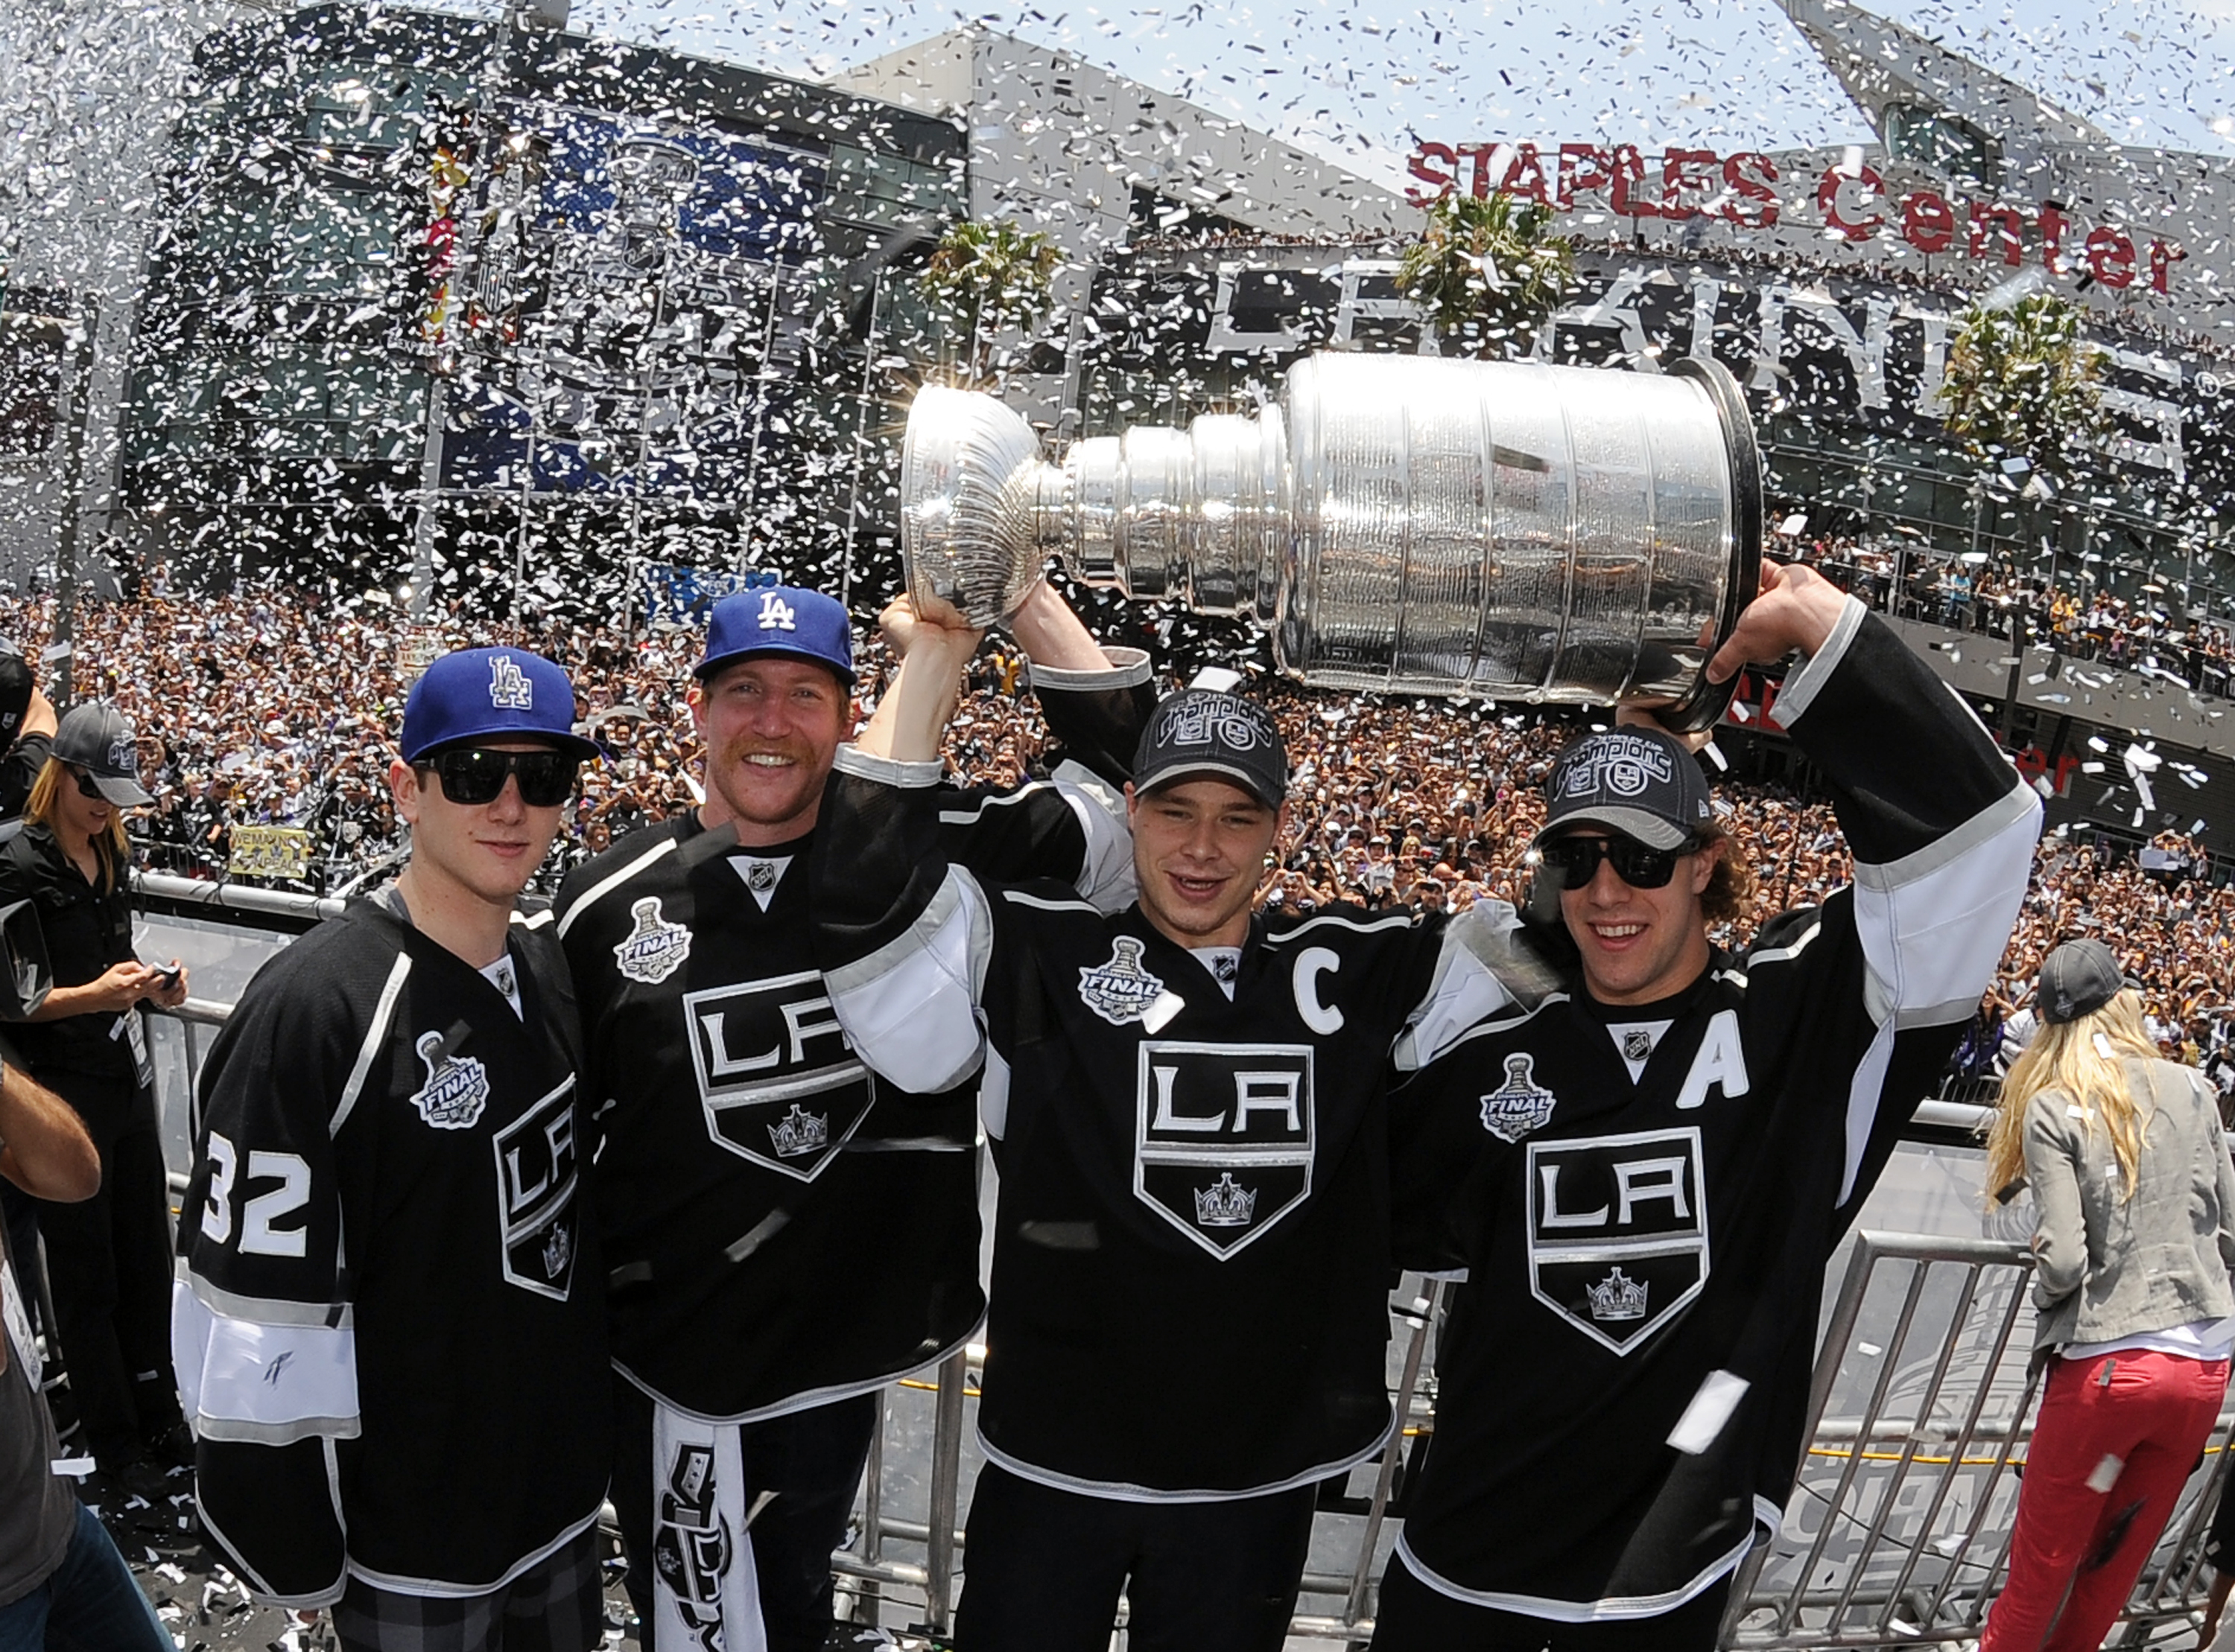 Most Trying Experience': Nicole Brown on Dustin Losing LA Kings' Captaincy